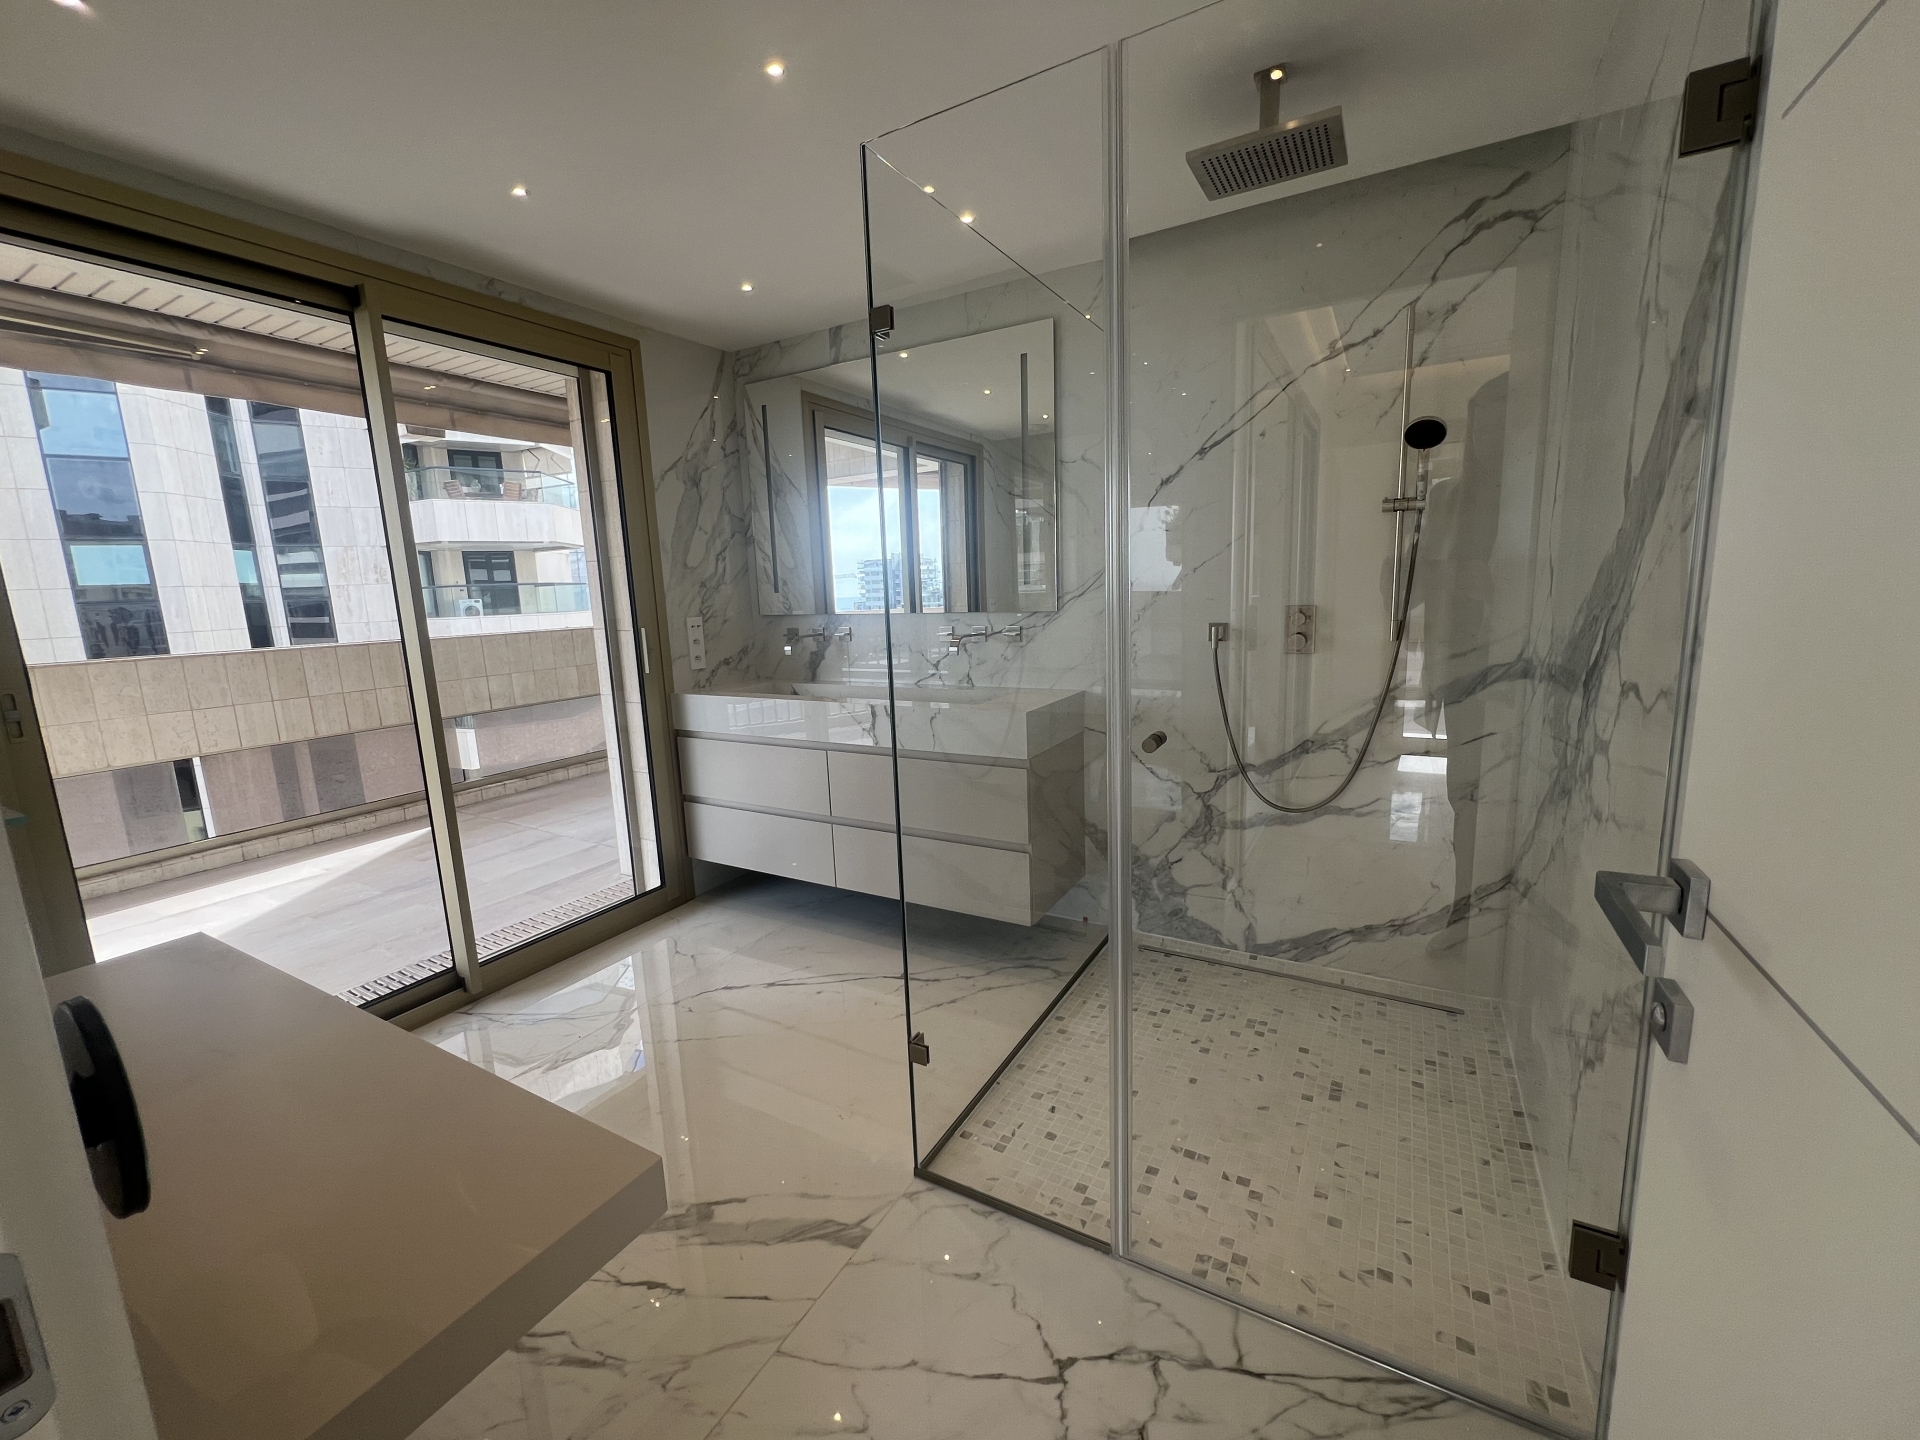 Dotta 5 rooms apartment for rent - GEORGE V - Monte-Carlo - Monaco - imgimage00006